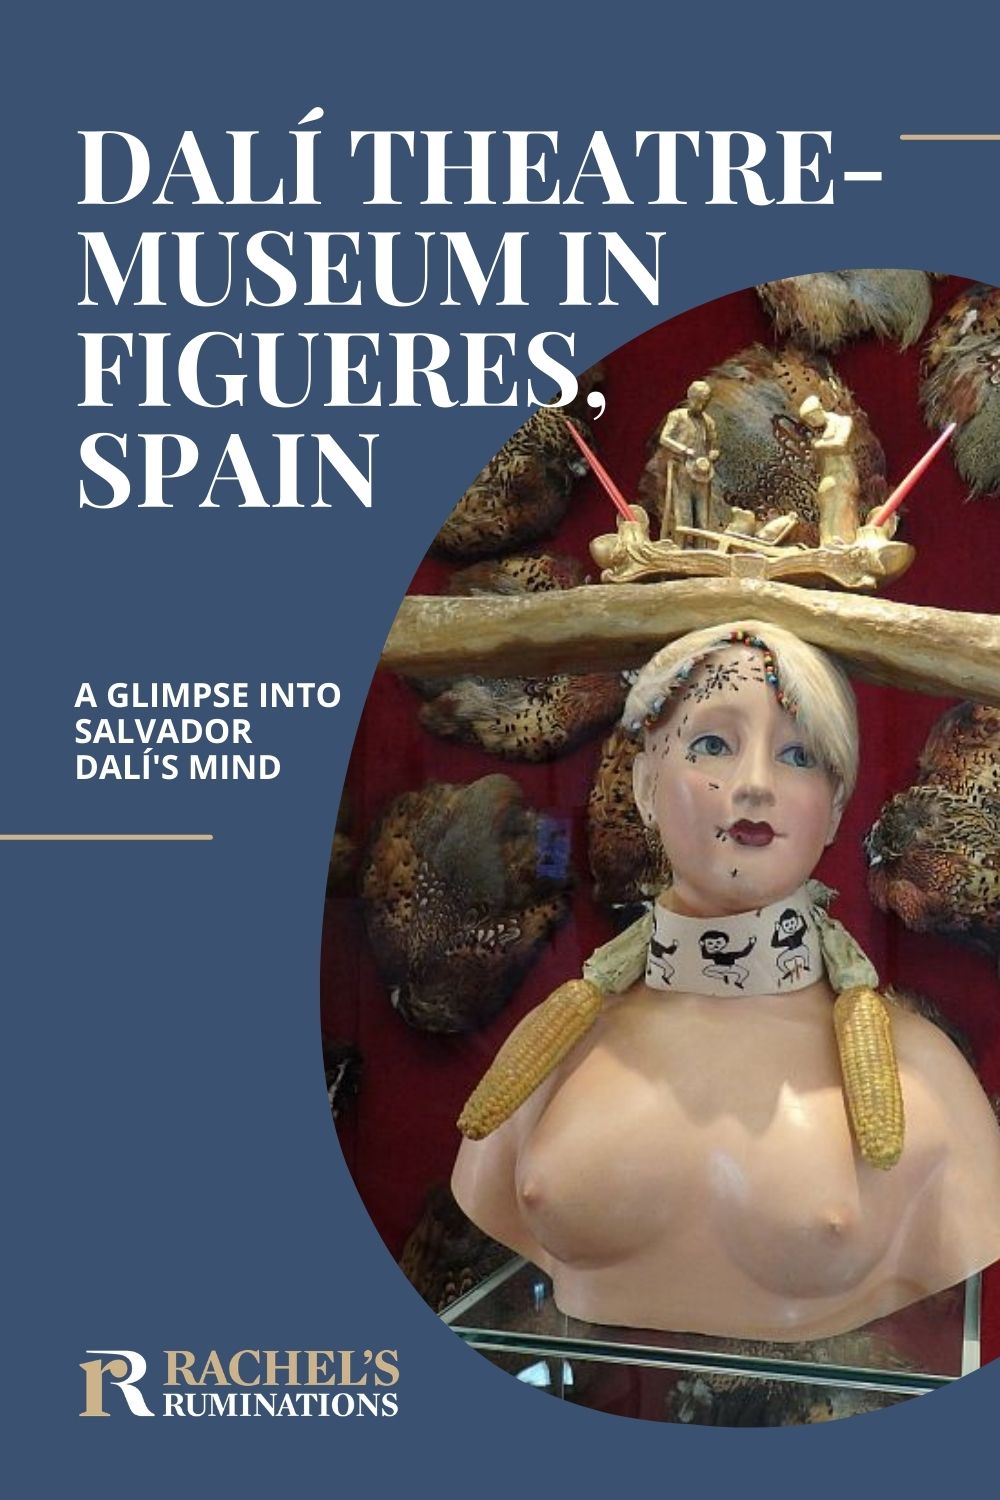 At the Dalí Theatre-Museum in Figueres, Spain, you can experience the bizarre and sometimes nightmarish genius of Salvador Dali. Read about it here! via @rachelsruminations